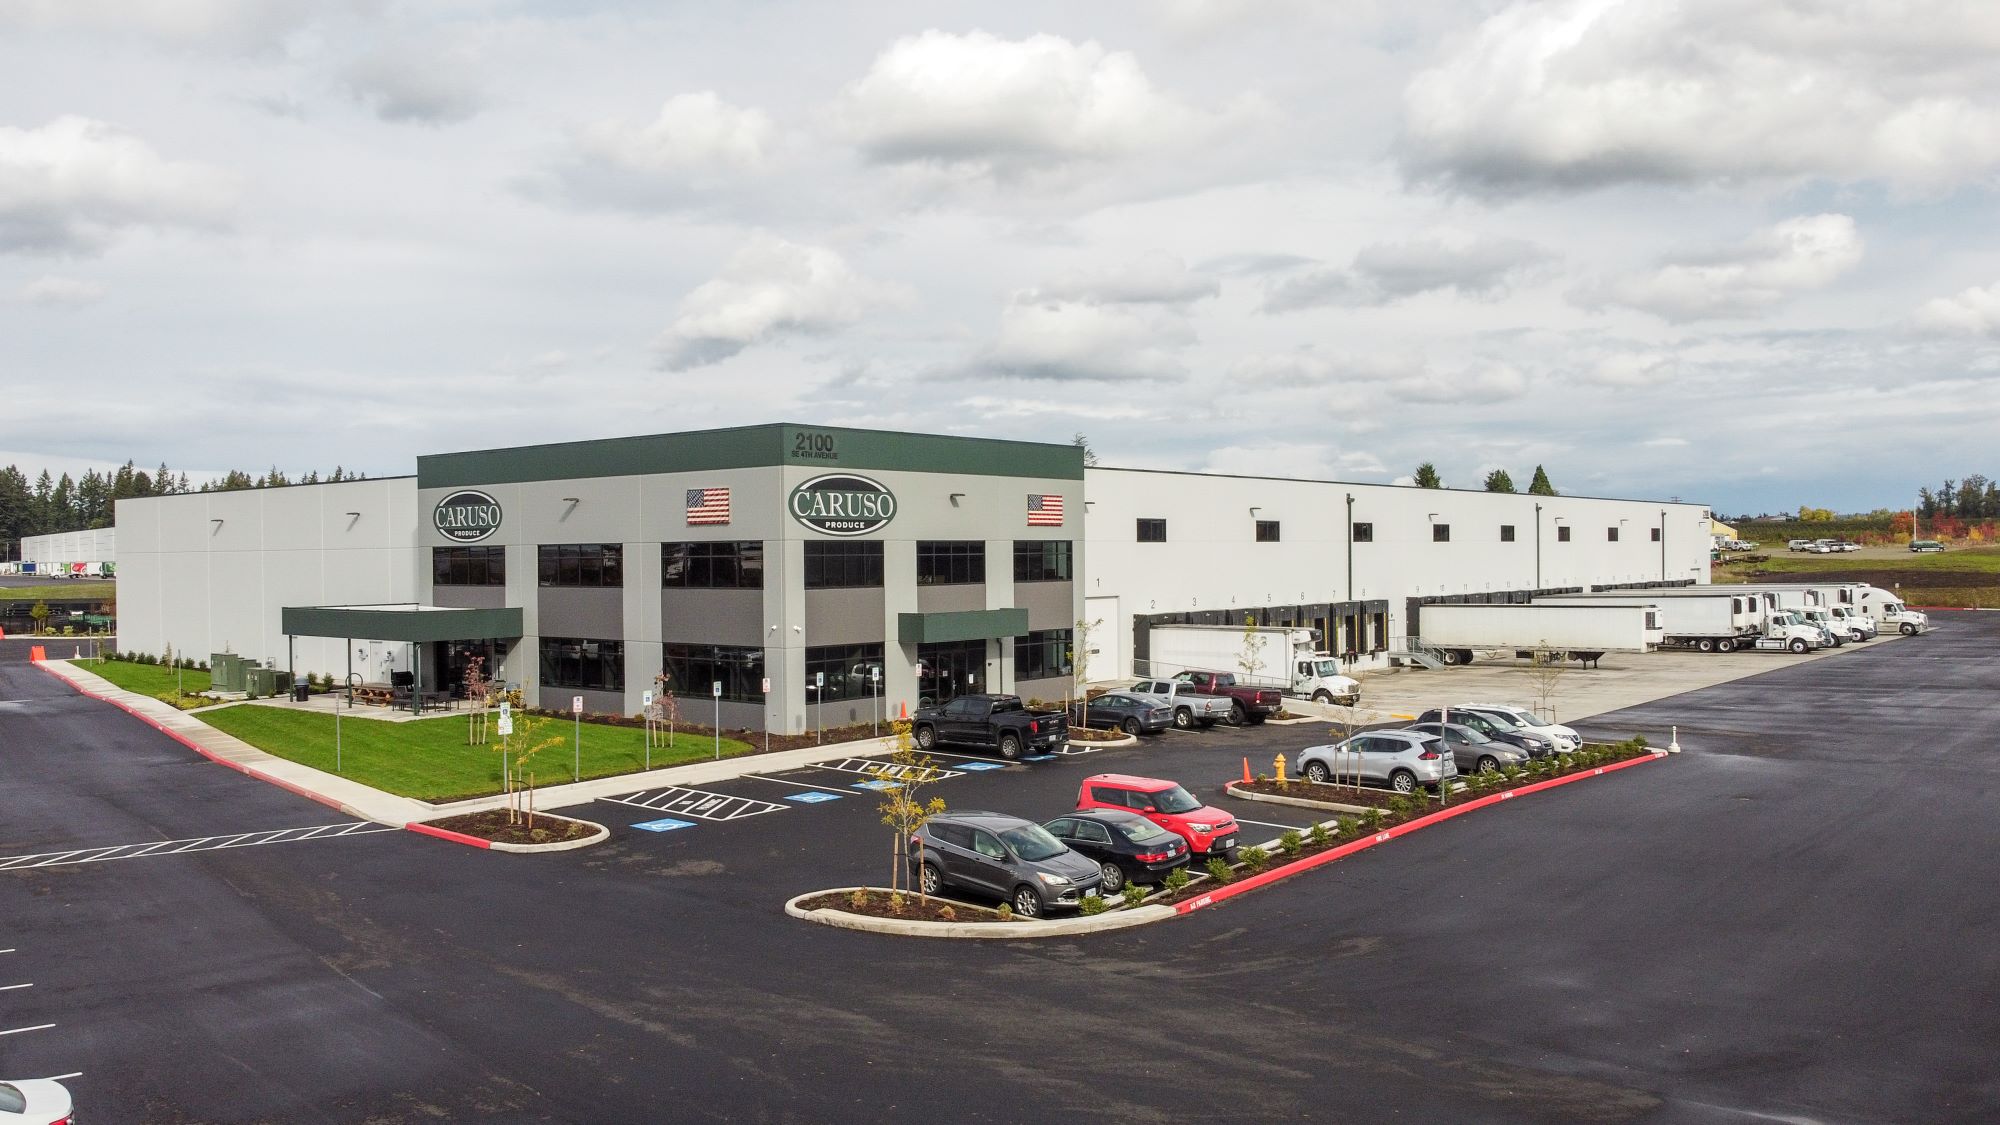 Caruso Produce photo of the new headquarters in Canby Oregon